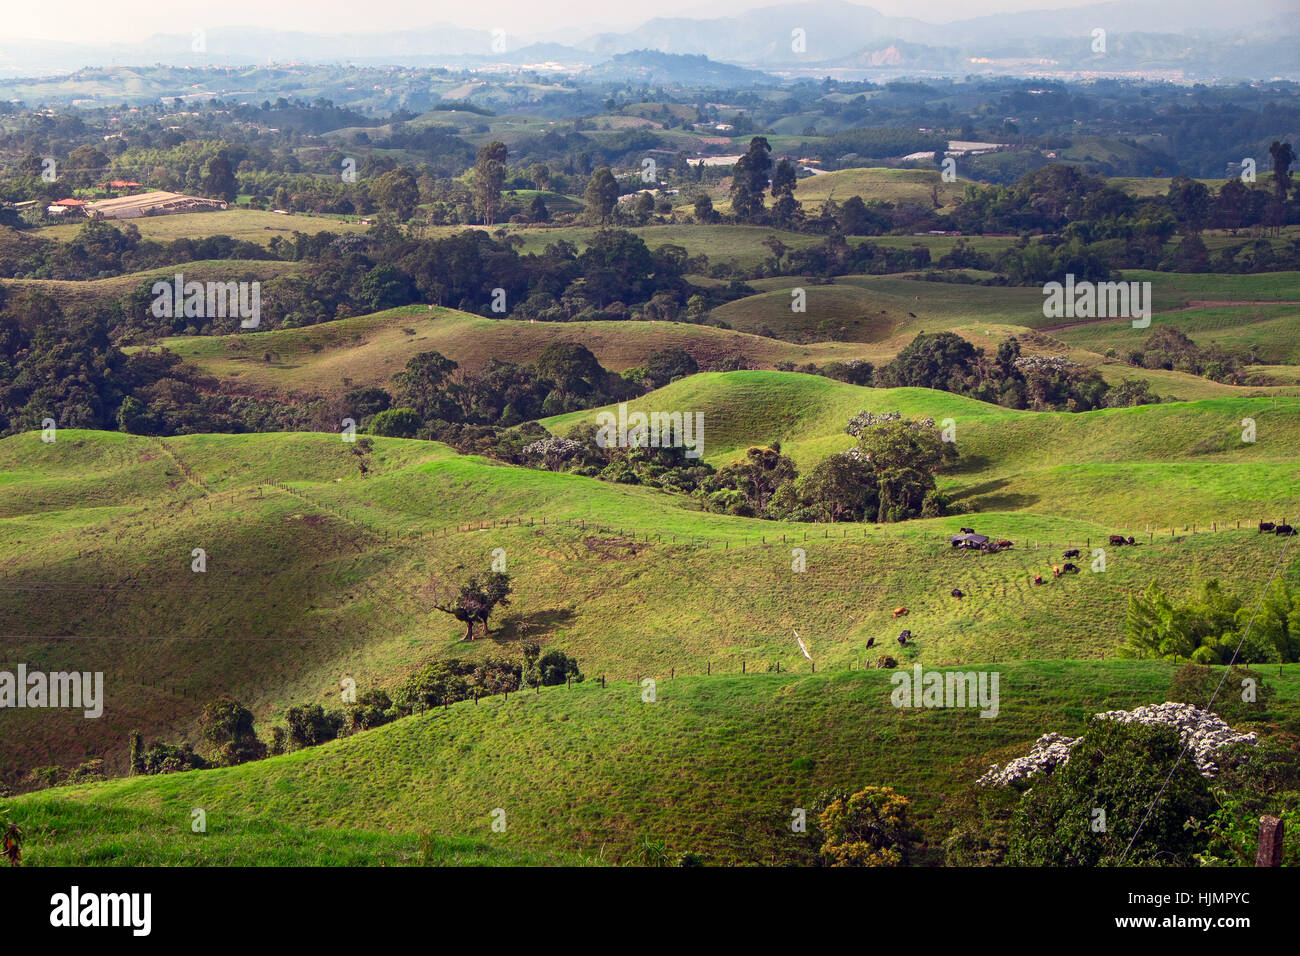 Hilly Landscape in Quindío (Coffee Region), Colombia Stock Photo